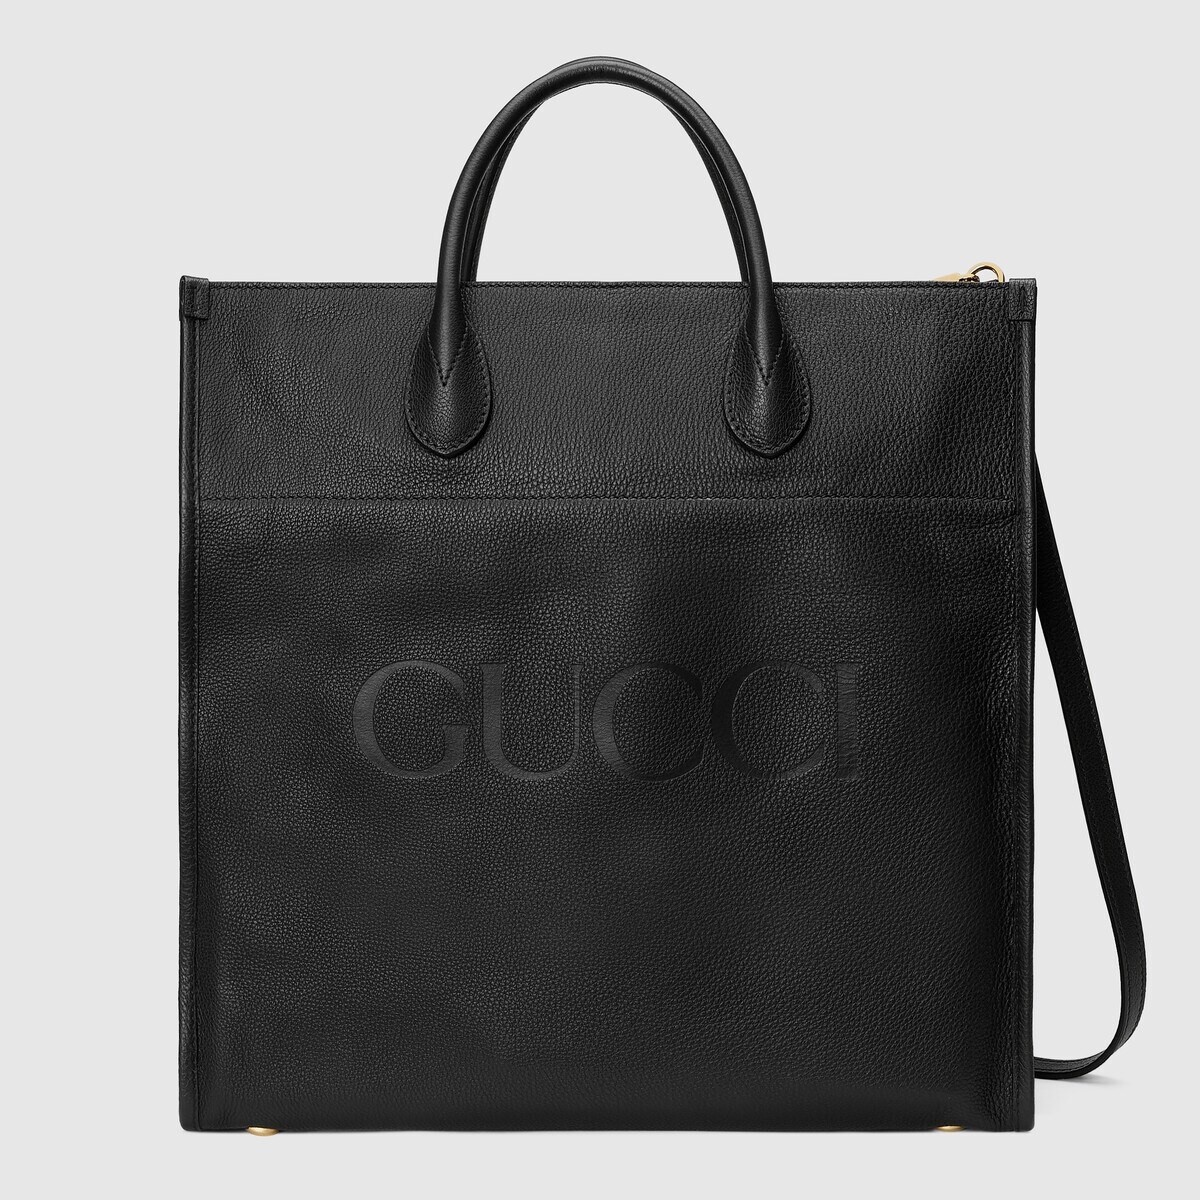 Large tote with Gucci logo - 1